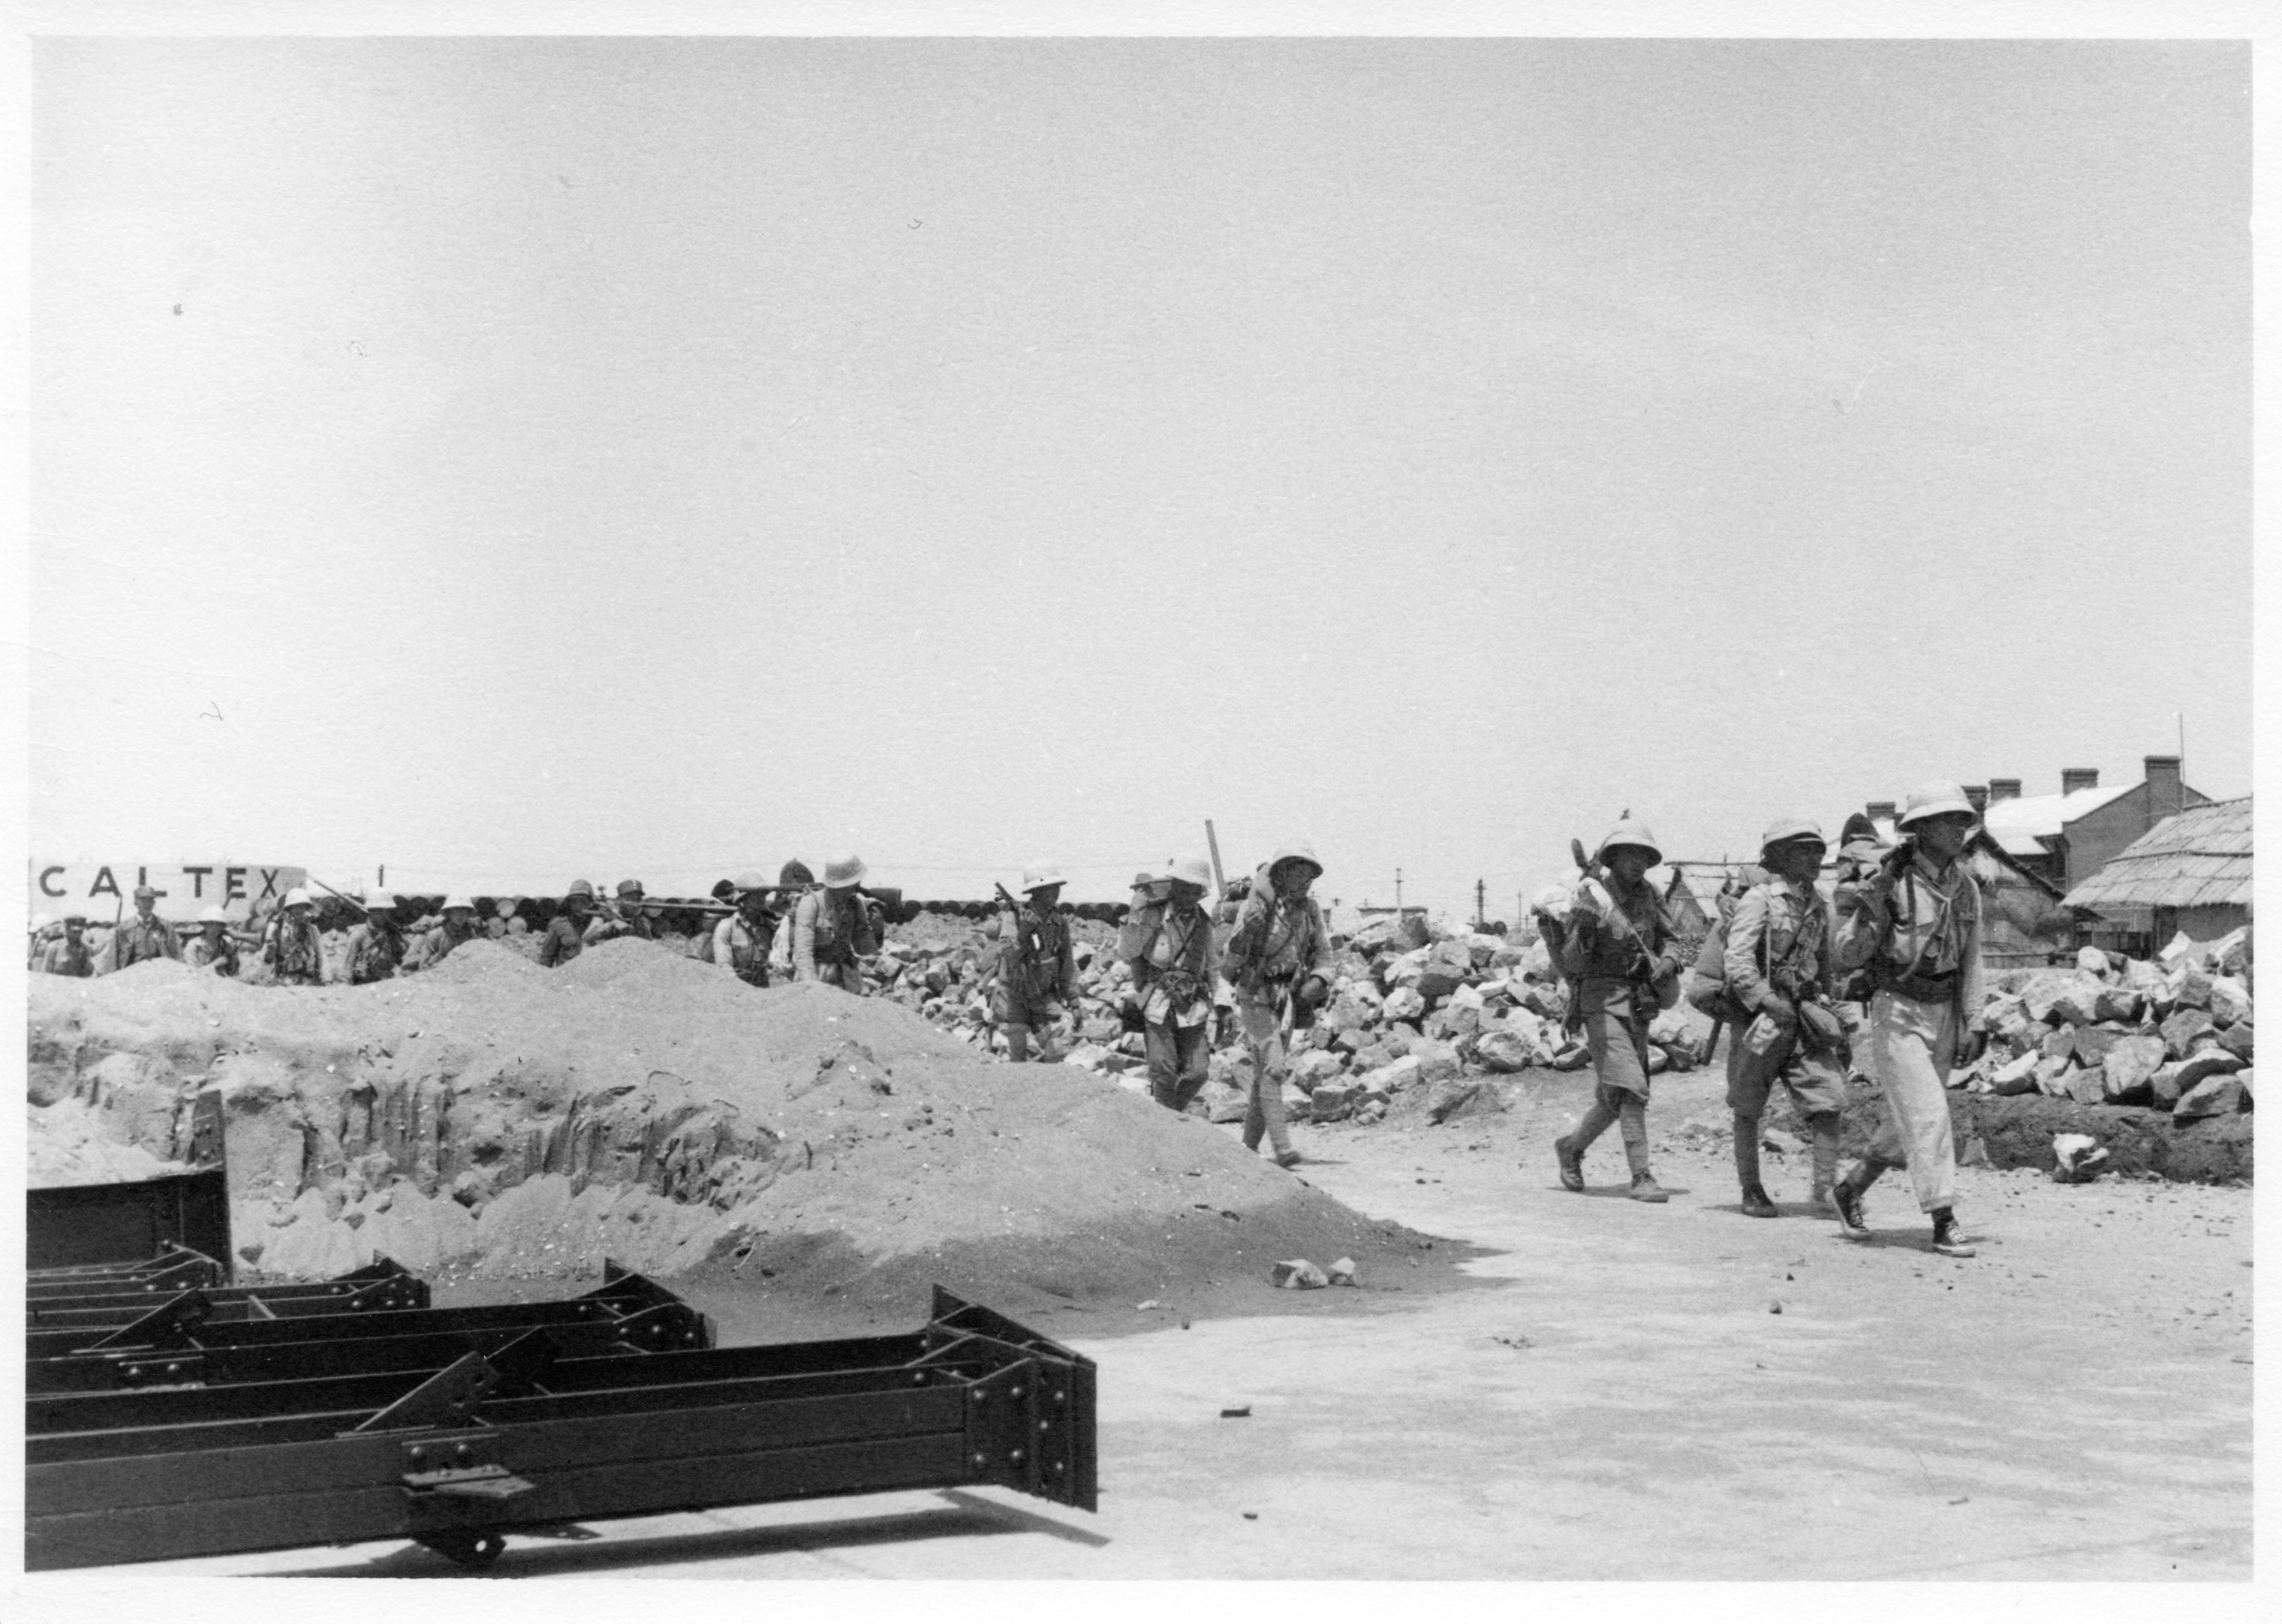 Nationalist troops march through the Caltex property to the battlefront. A Caltex oil tank is visible in the background. (Carolyn Davidson Hill)